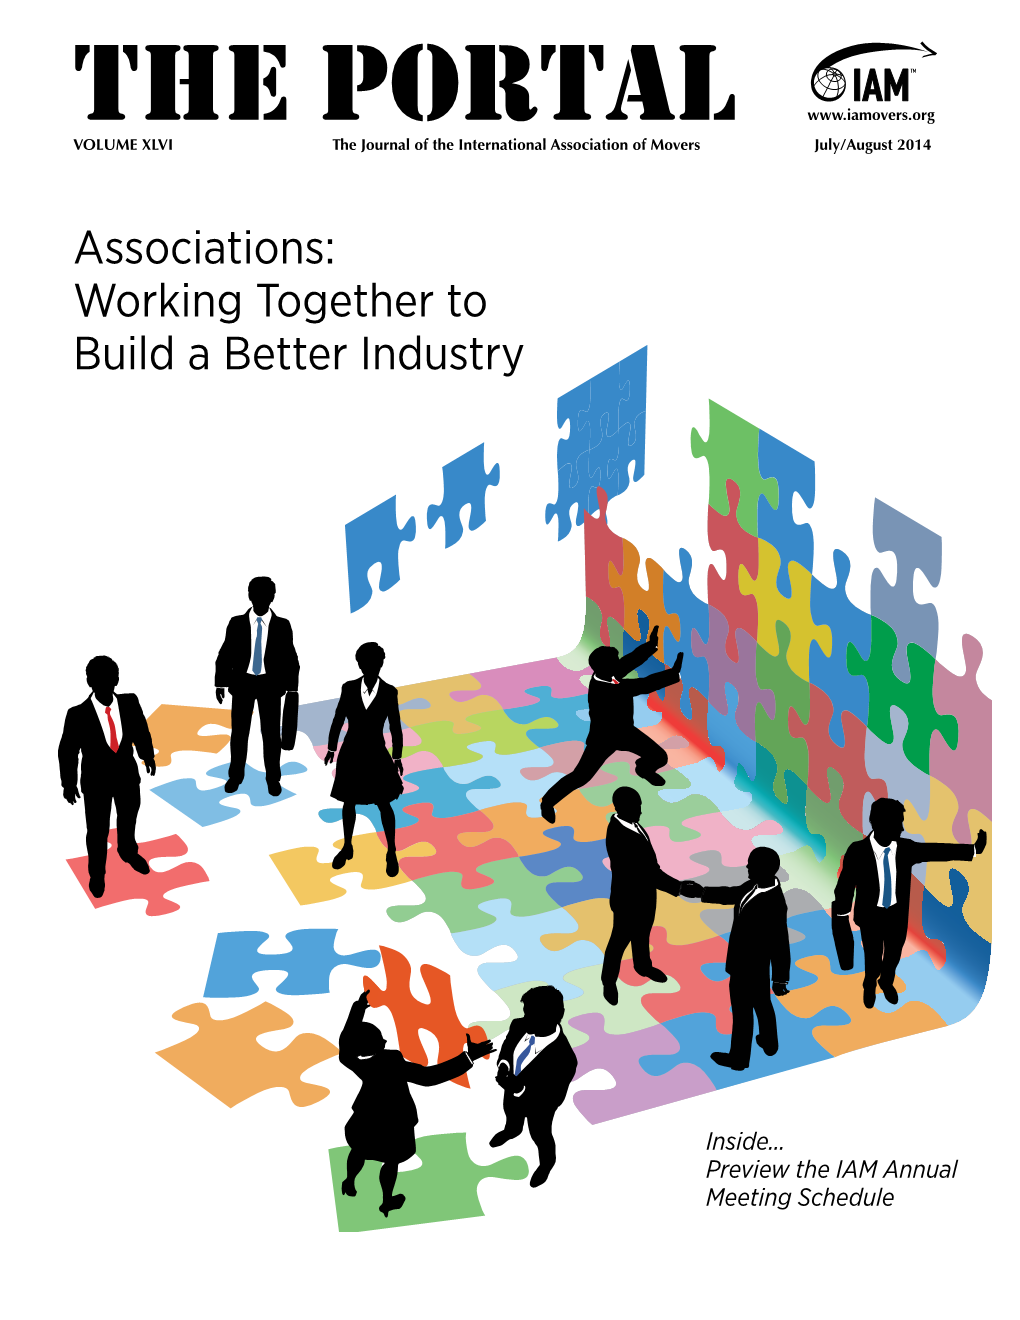 Associations: Working Together to Build a Better Industry